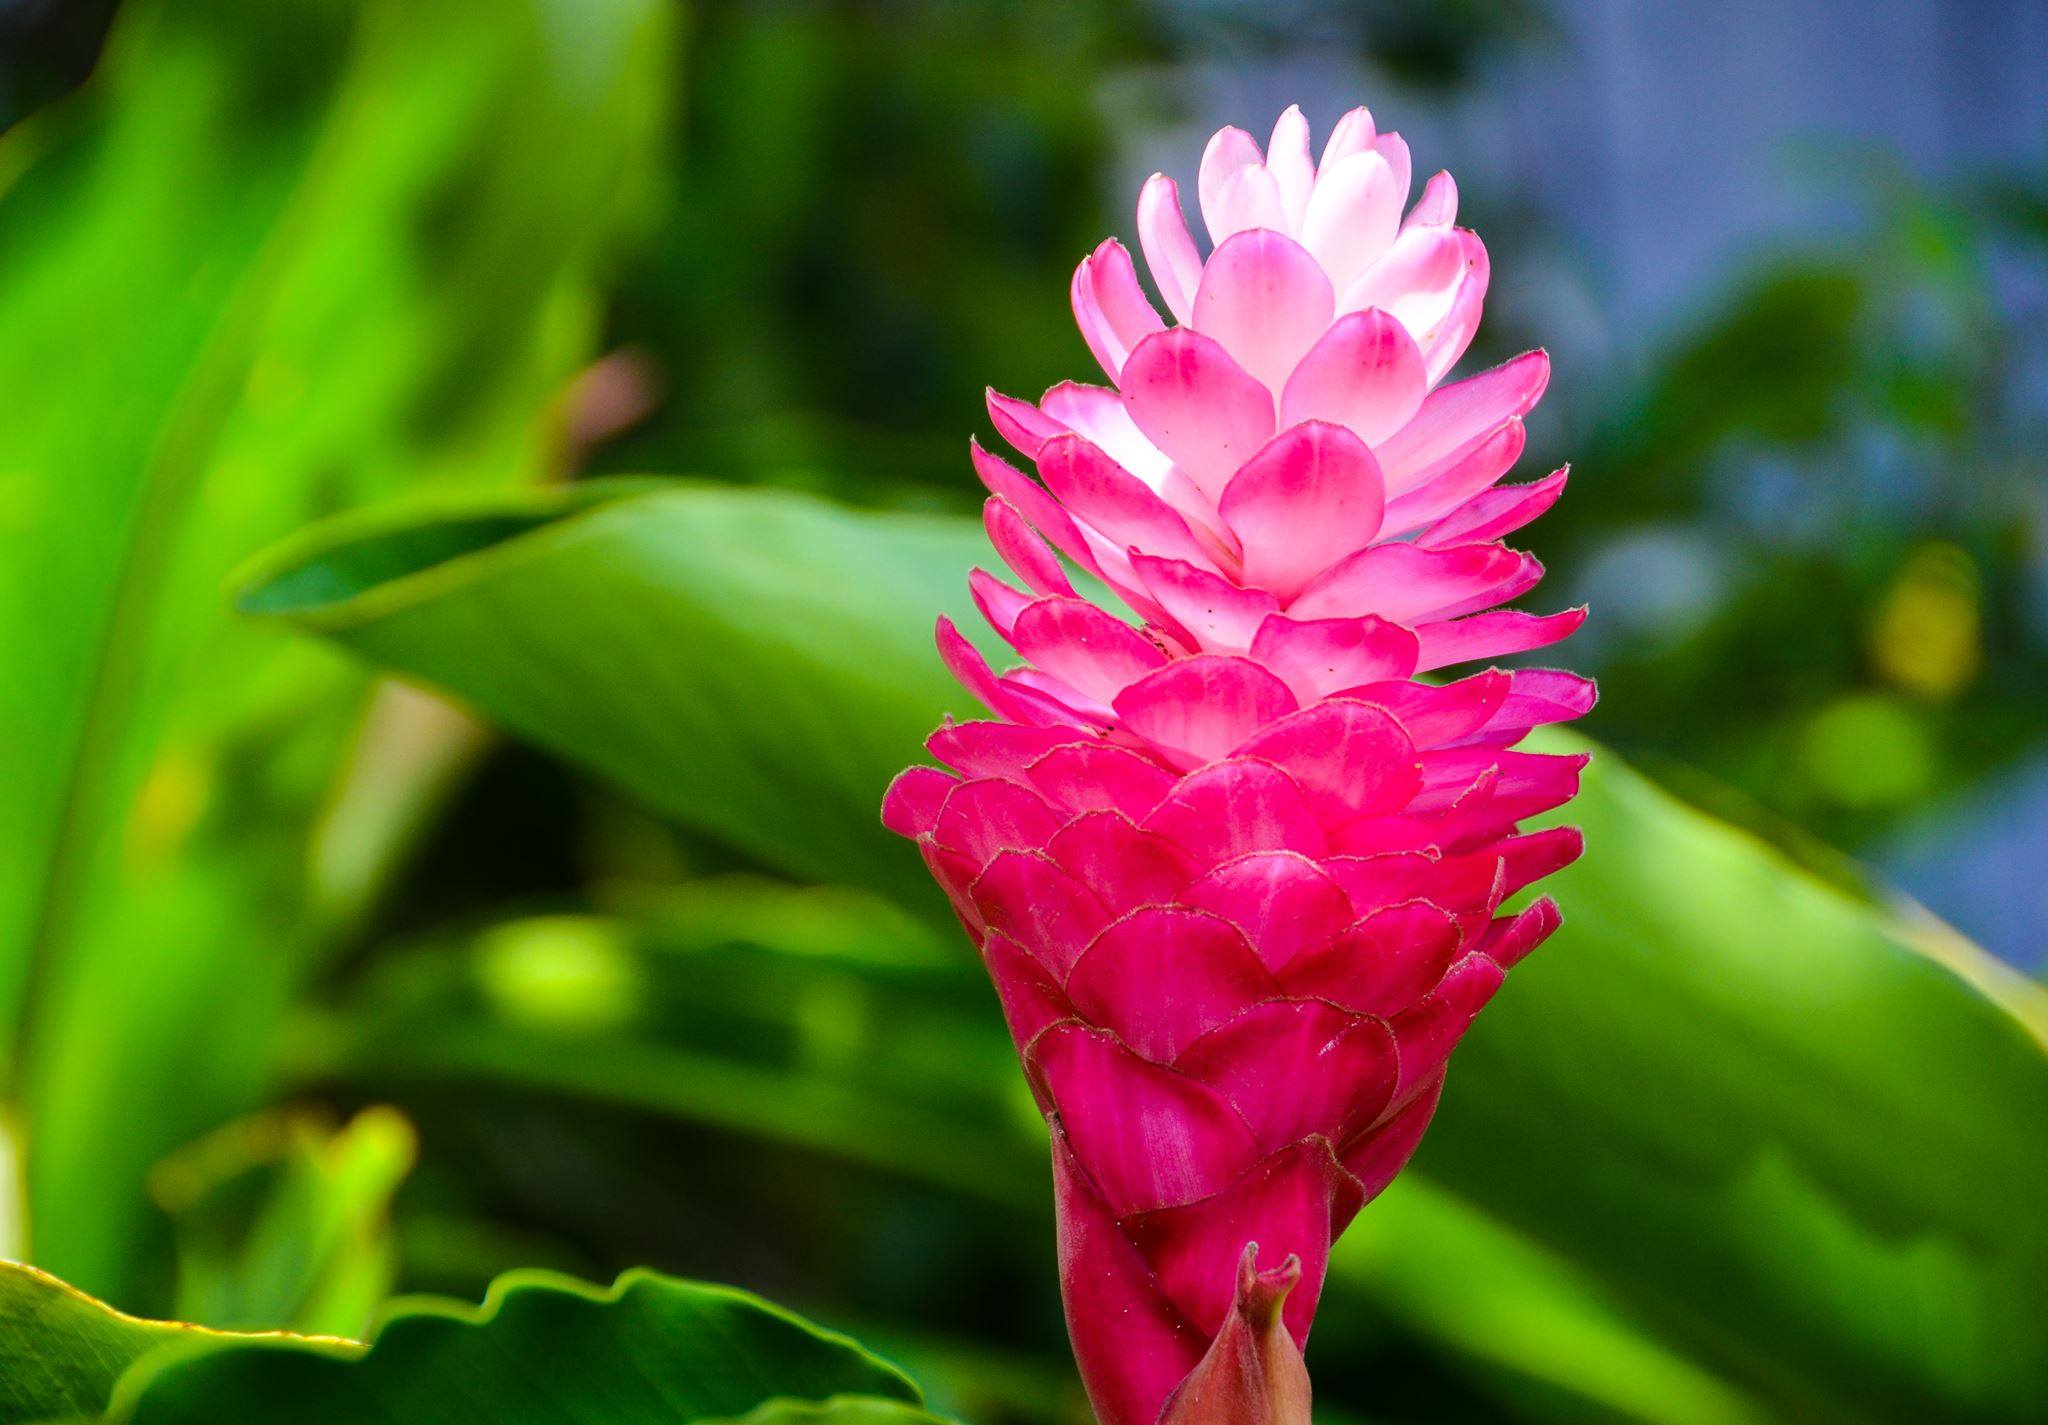  Picture with Pink Flower in Green Background HD Wallpapers for Free